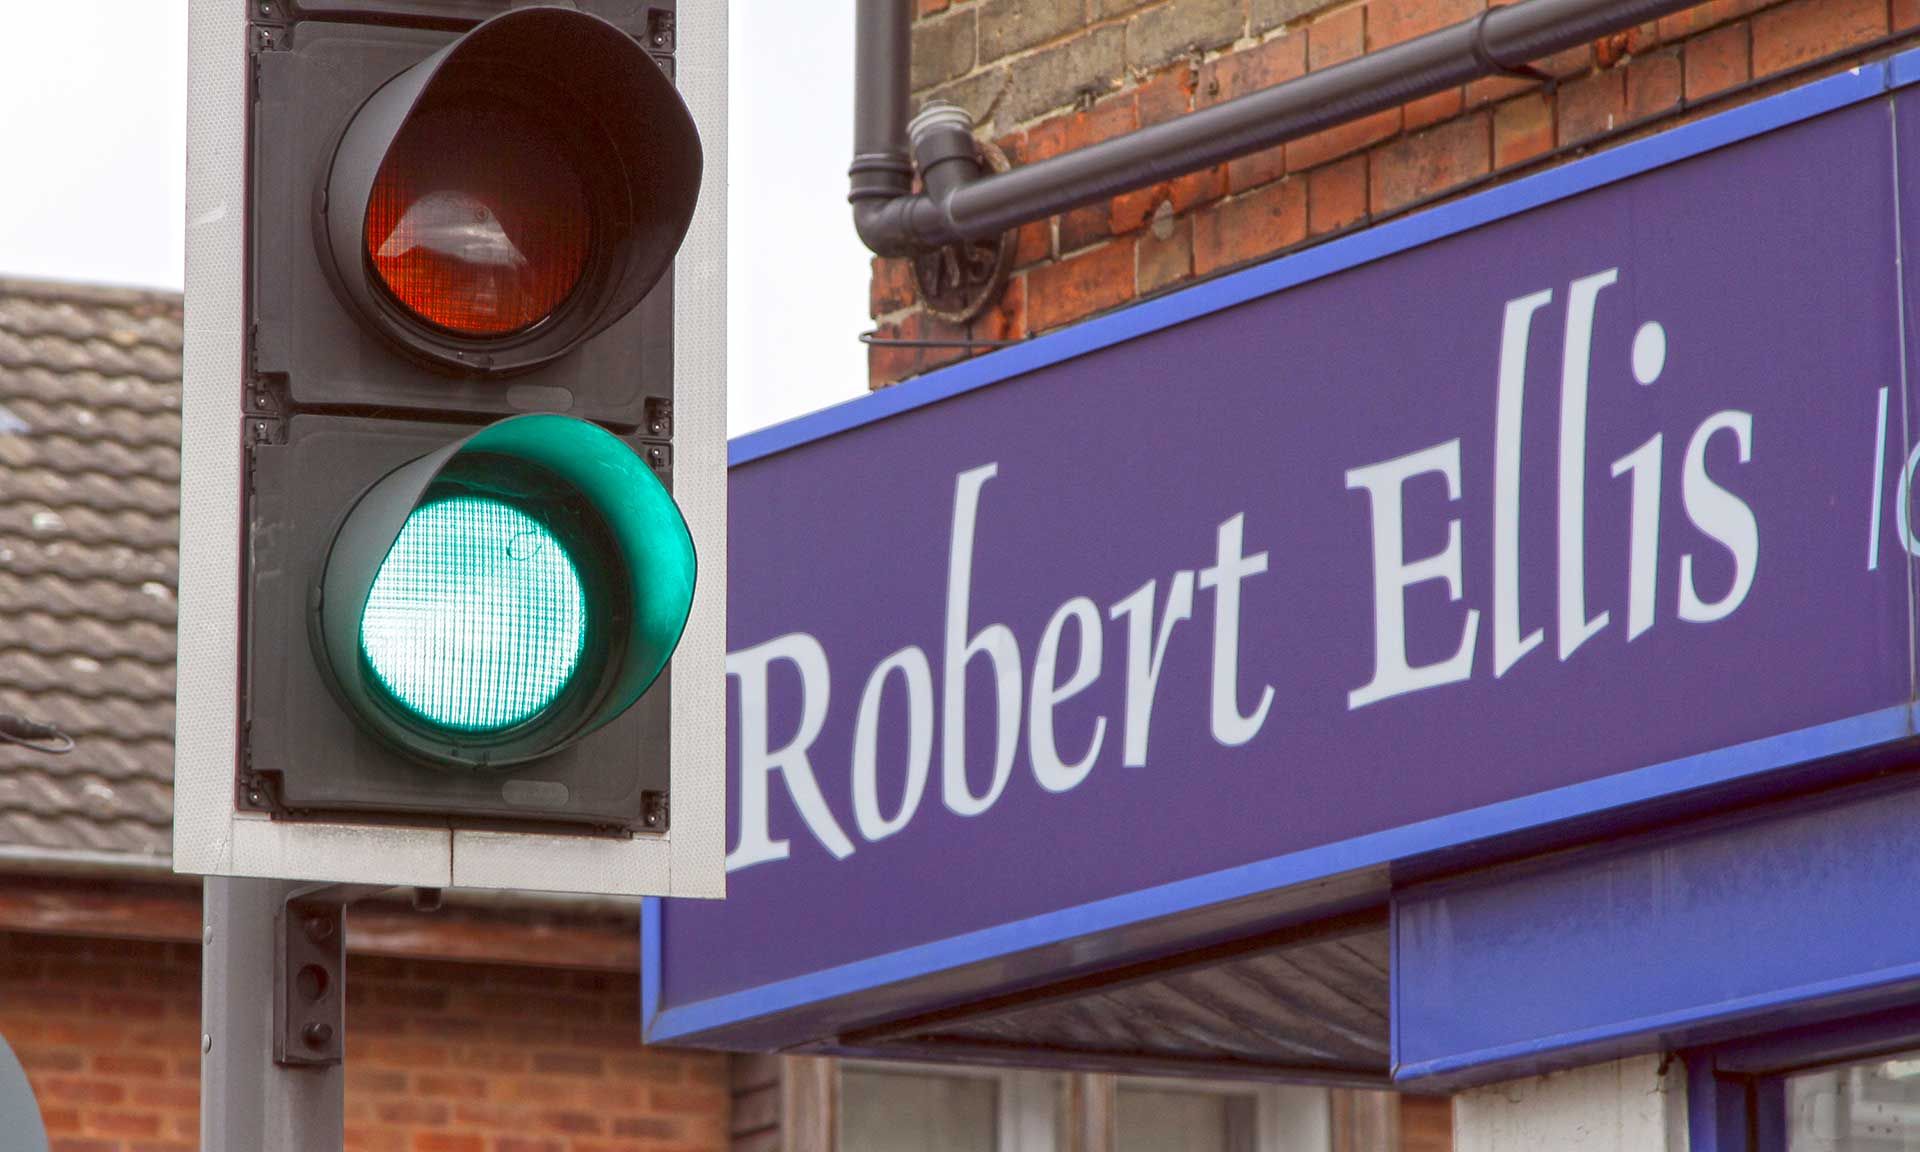 Selling a property in Nottingham or the surrounding area? Contact Robert Ellis